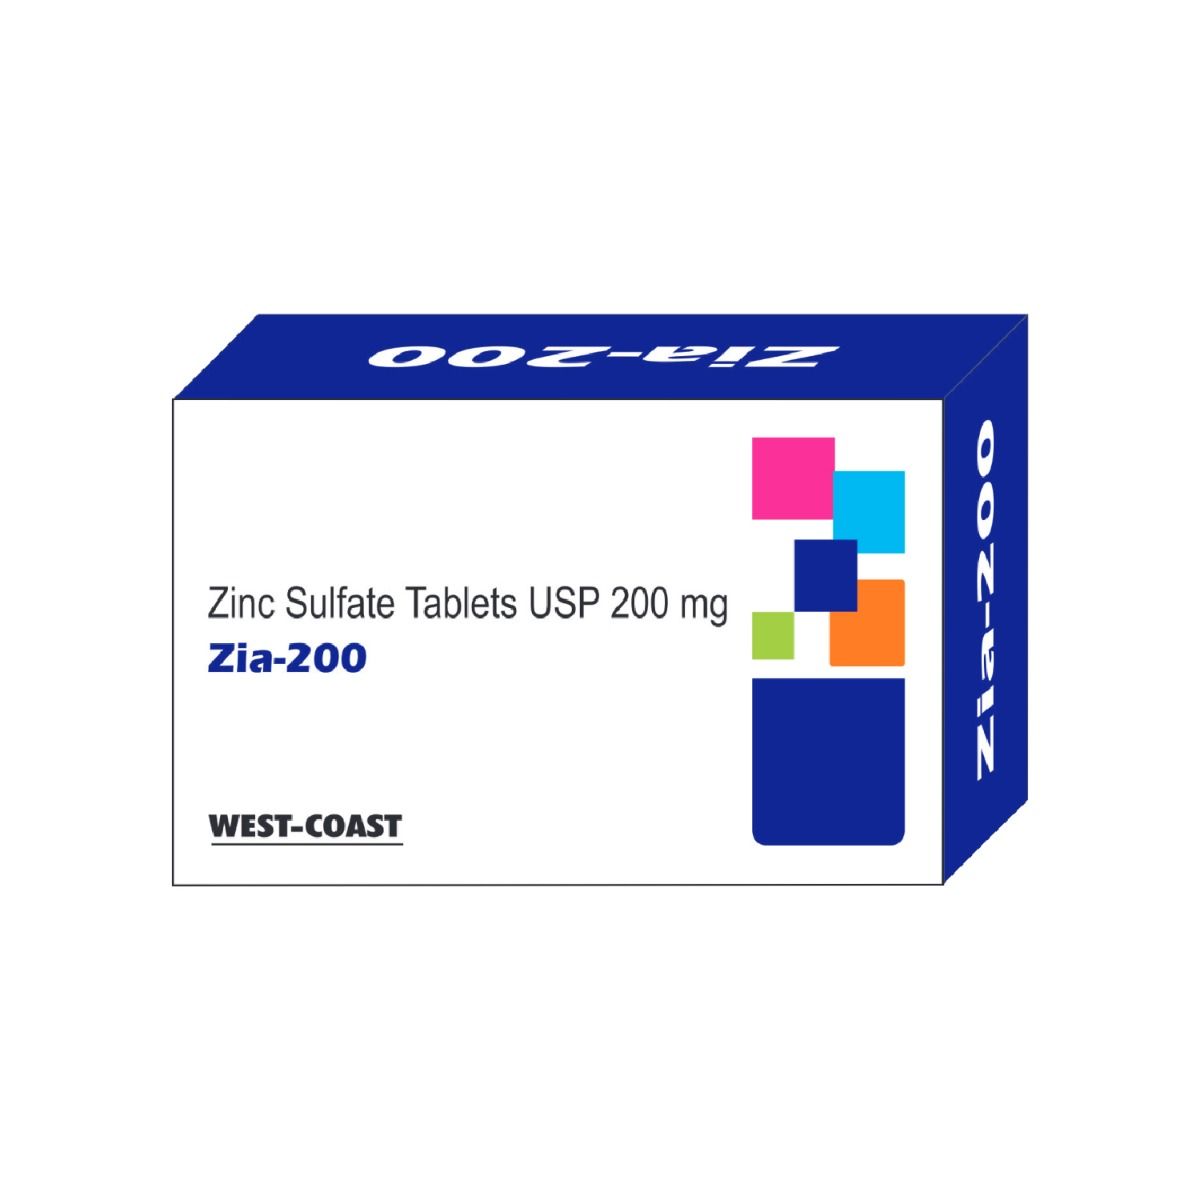 Zia-200 Zinc Sulphate USP 200 mg, 100 Tablets, Pack of 1 